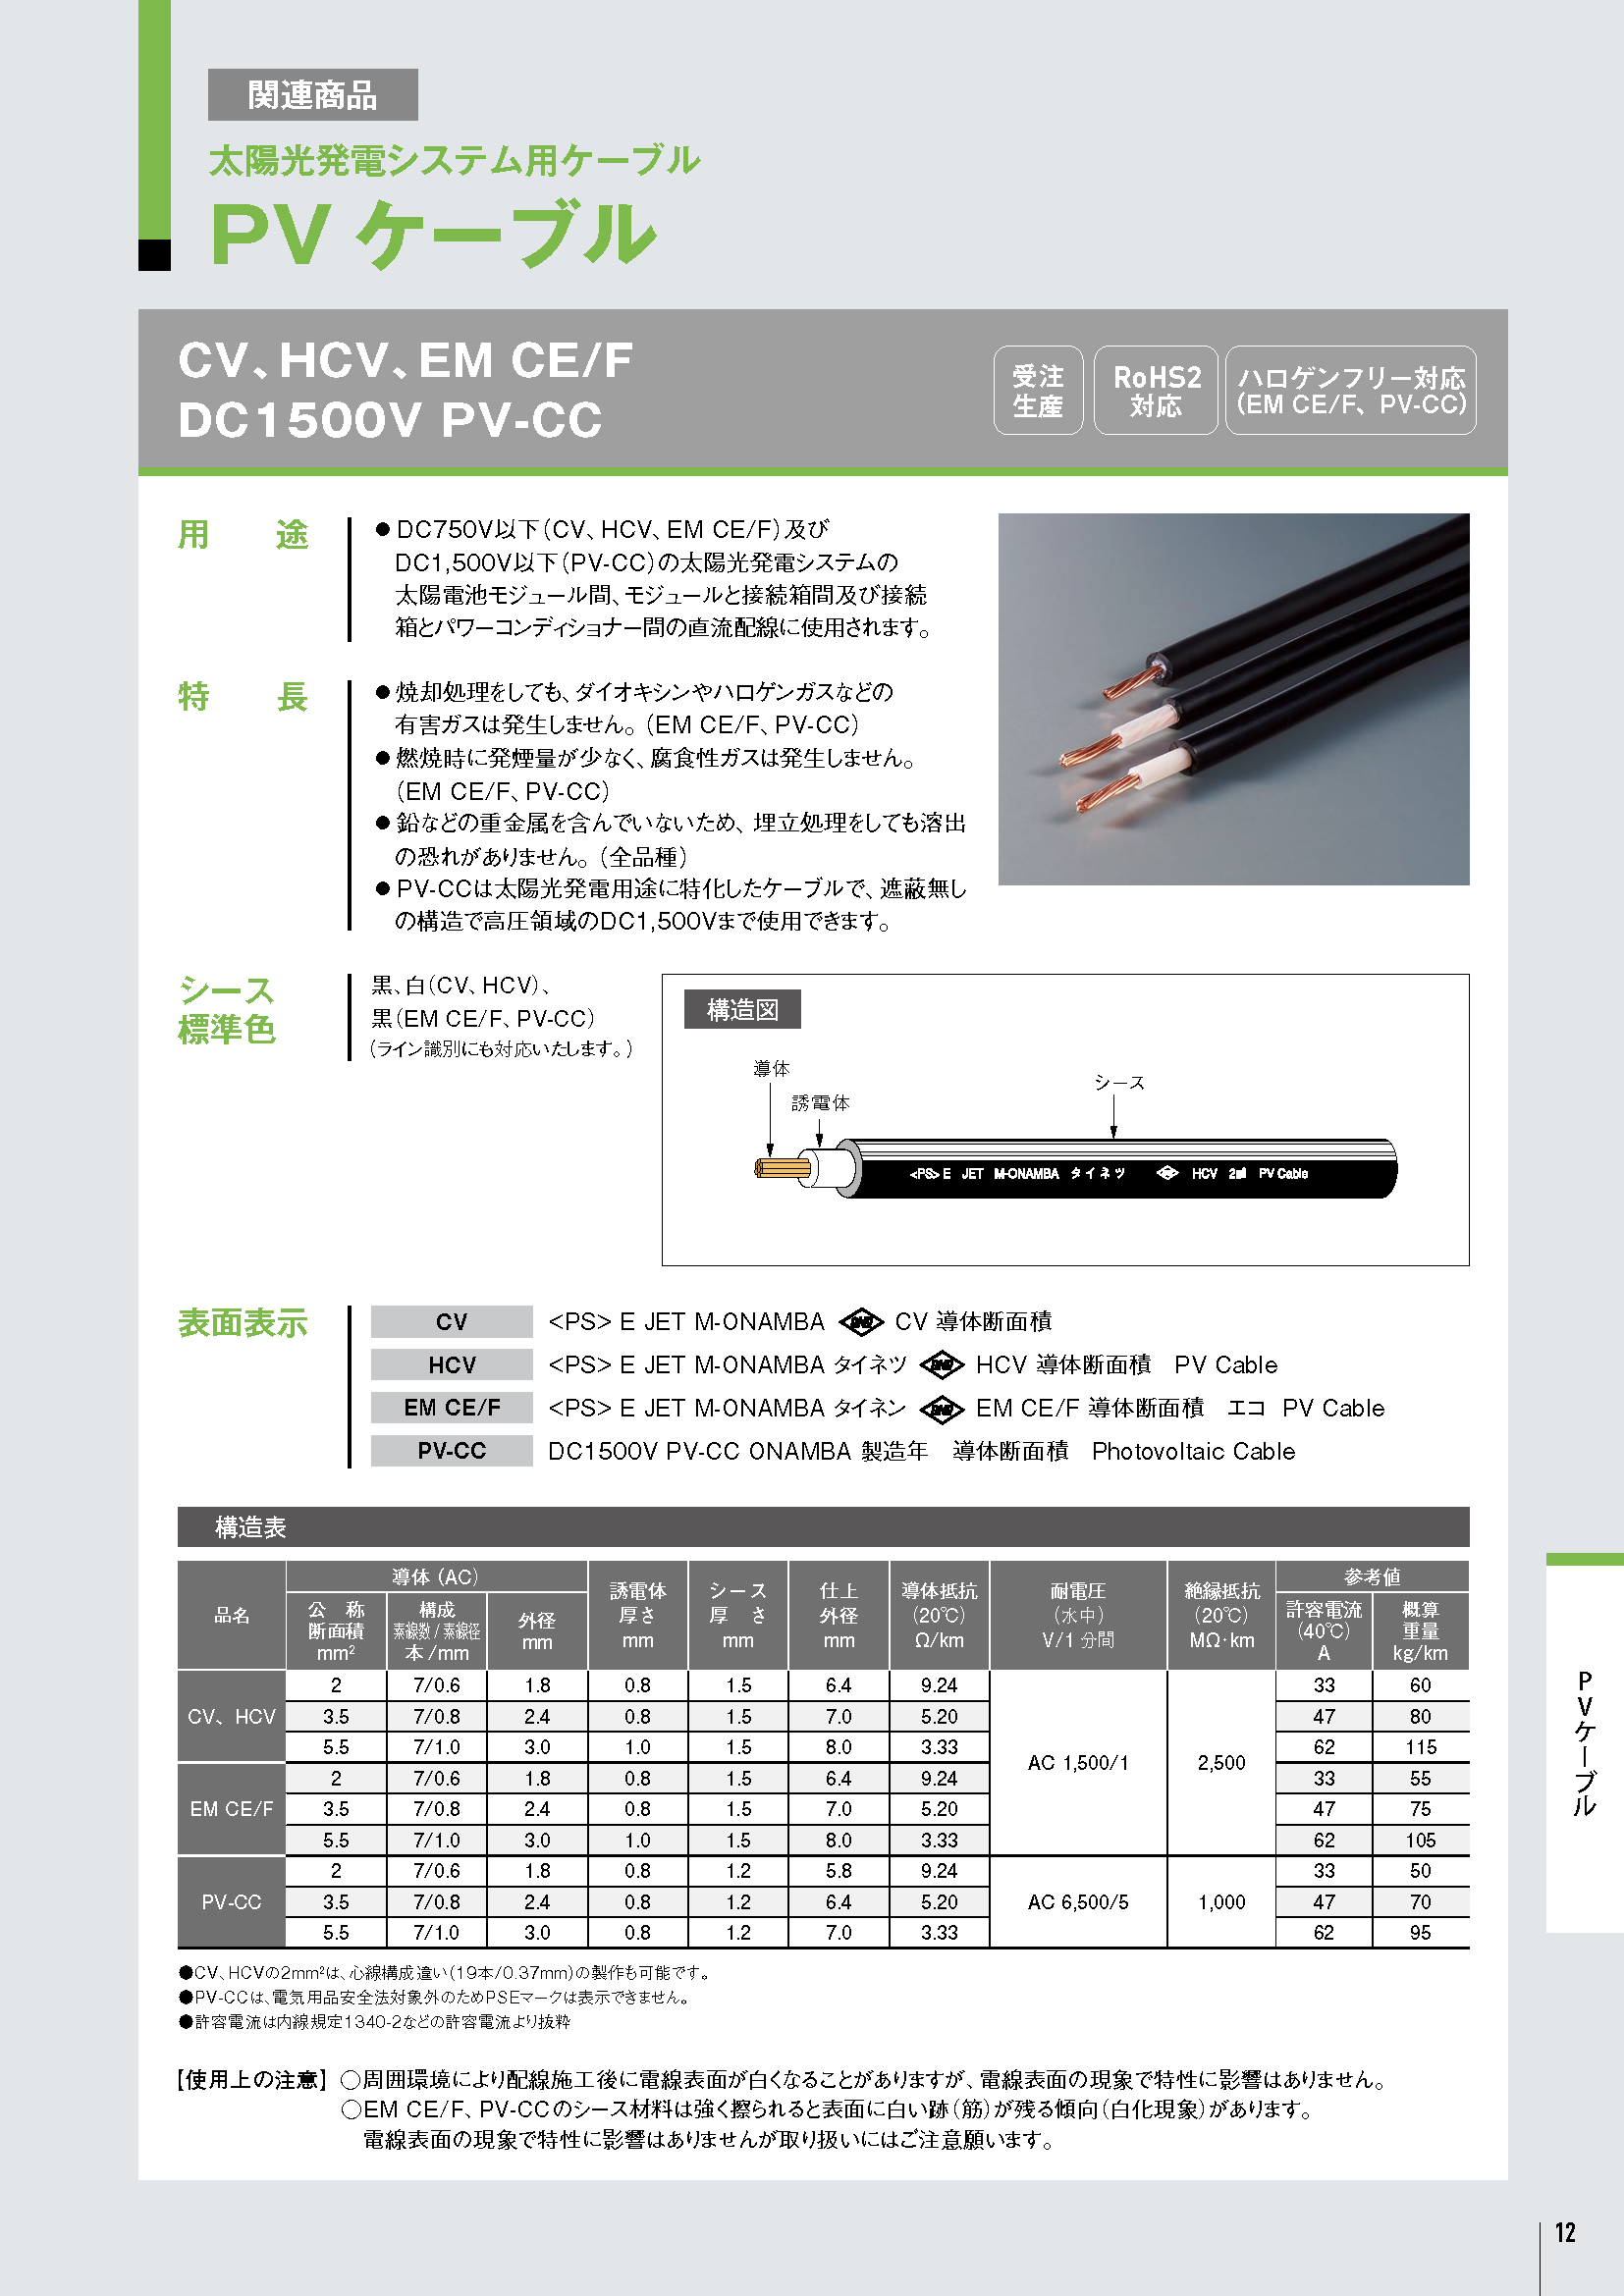 Cables for Solar Power Generation Systems (PV Cables)